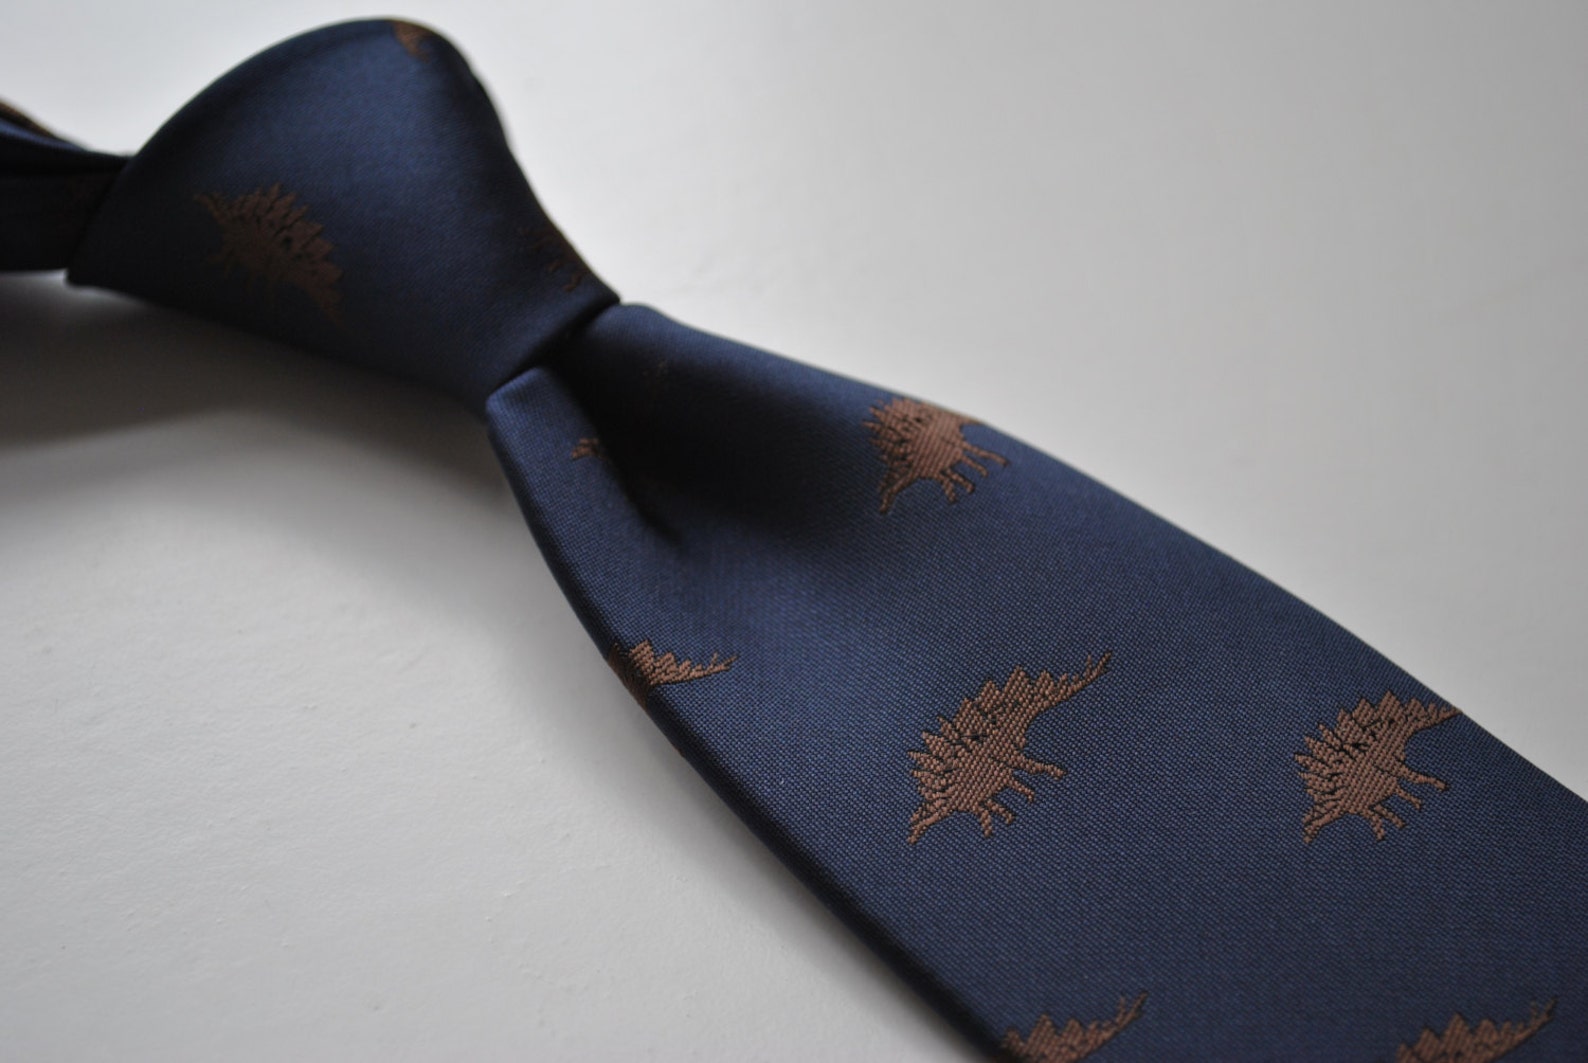 Navy tie with stegosaurus dinosaur embroidered design with | Etsy